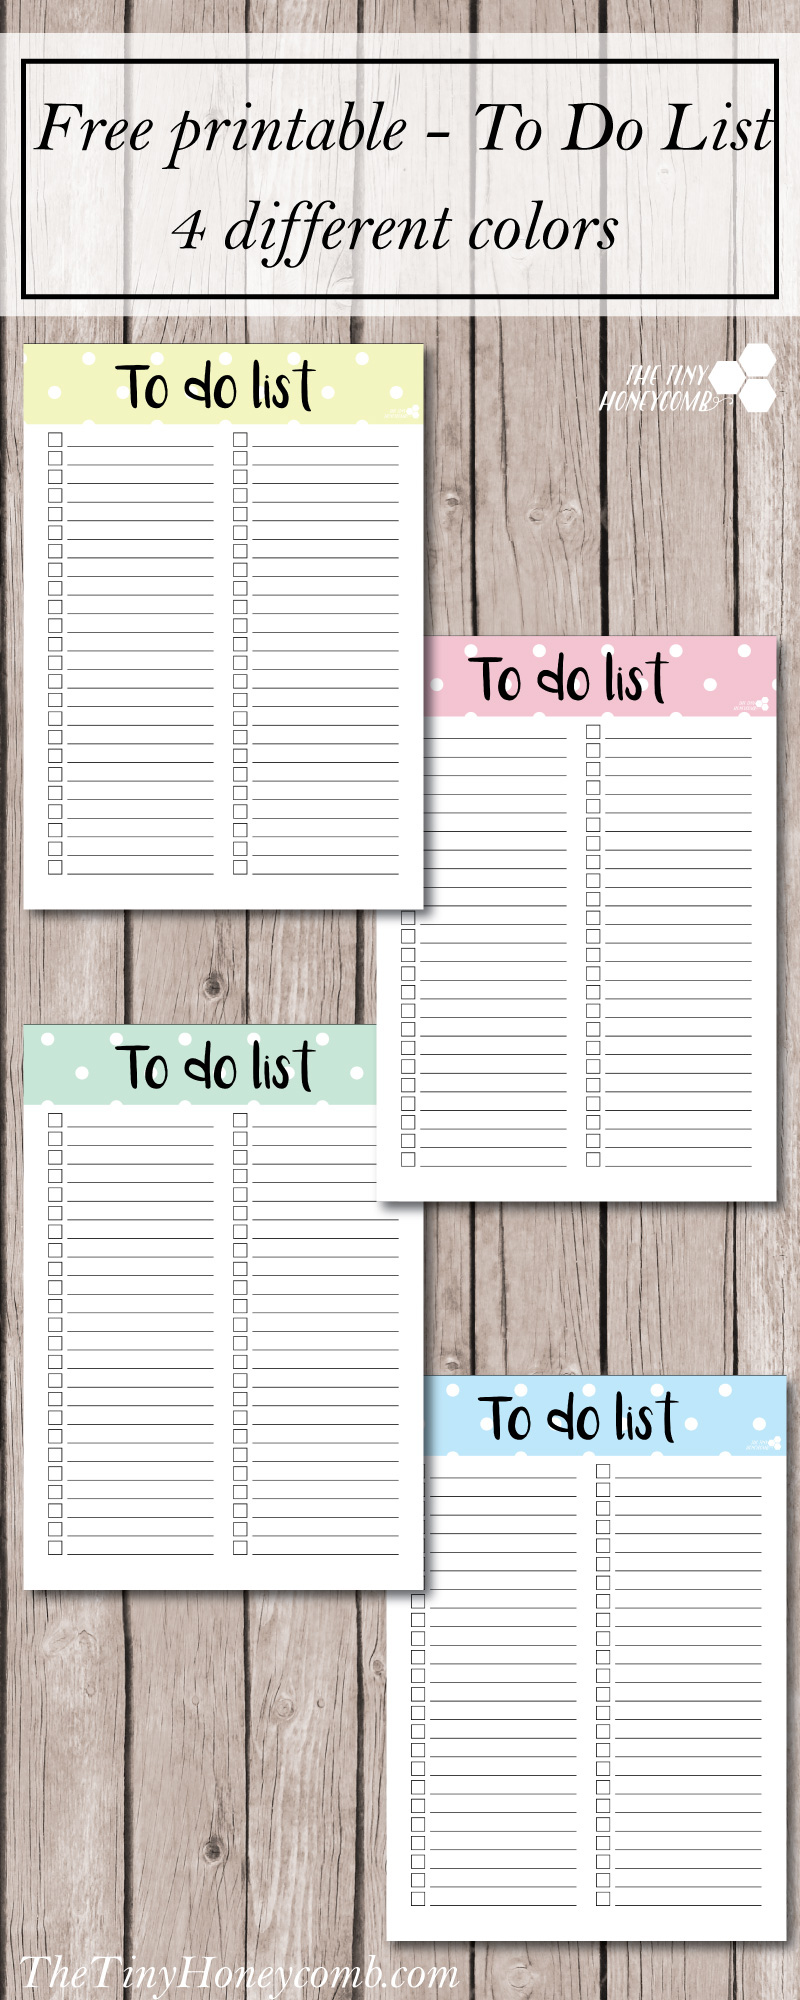 Where Have I Been Free Printable To Do List The Tiny Honeycomb